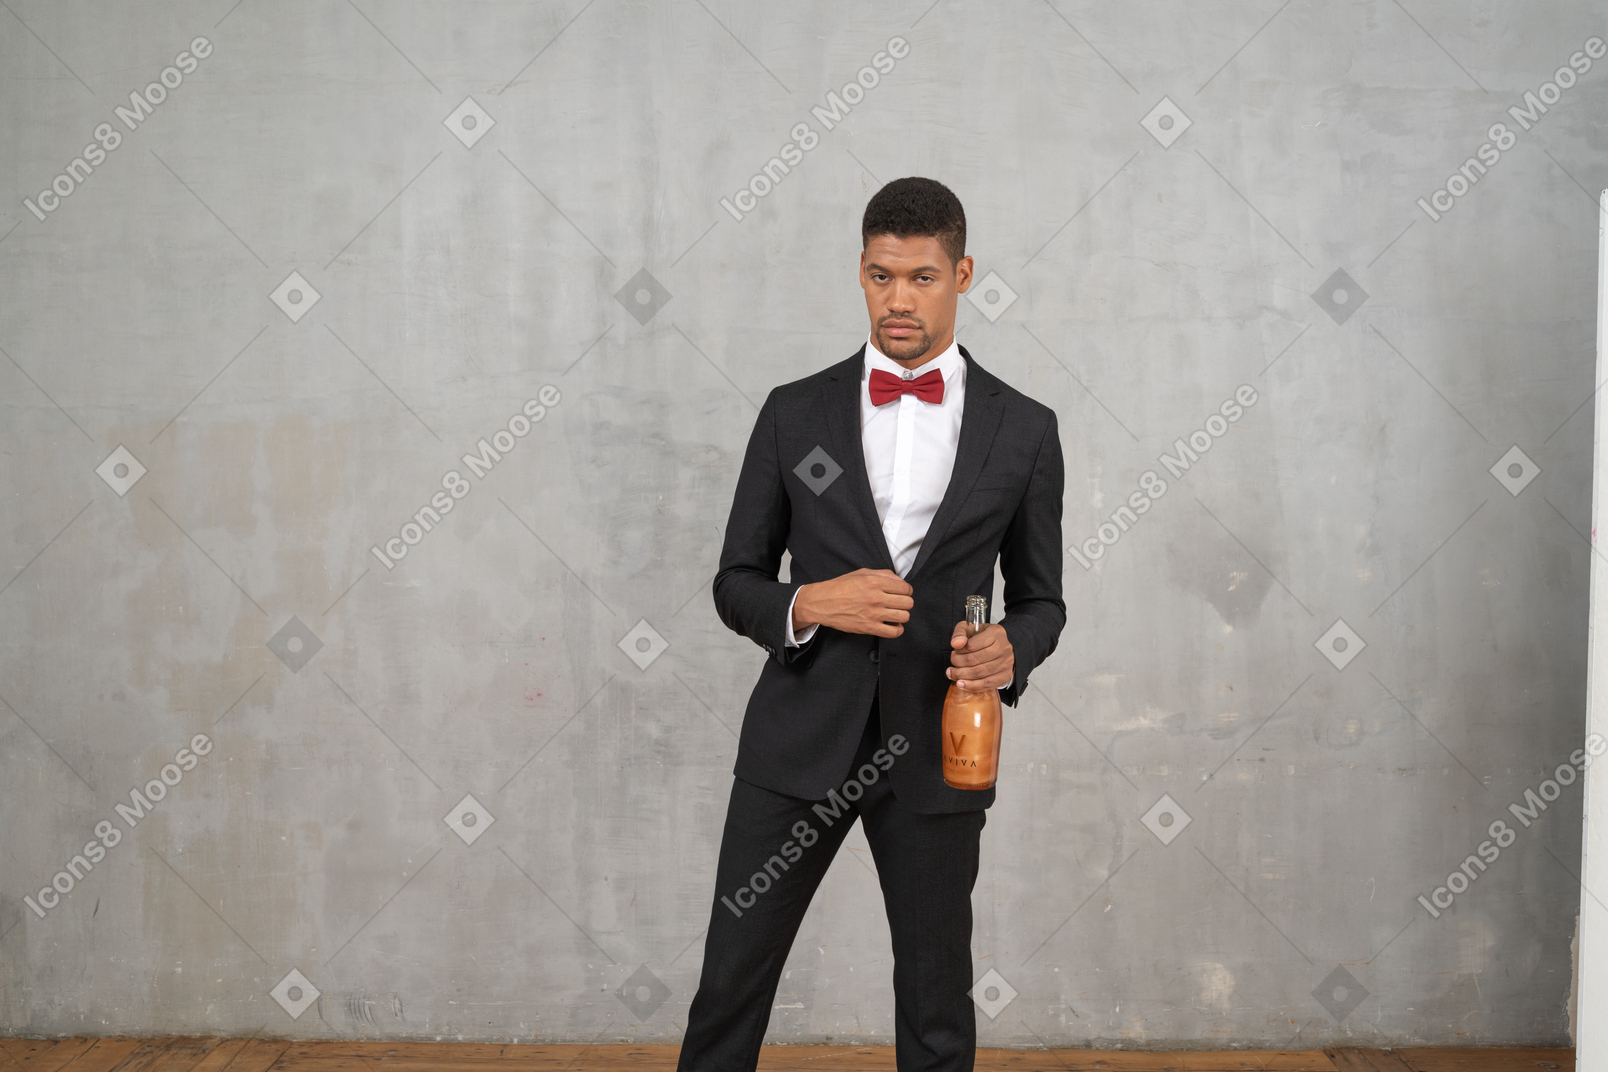 Tipsy man standing with a champagne bottle